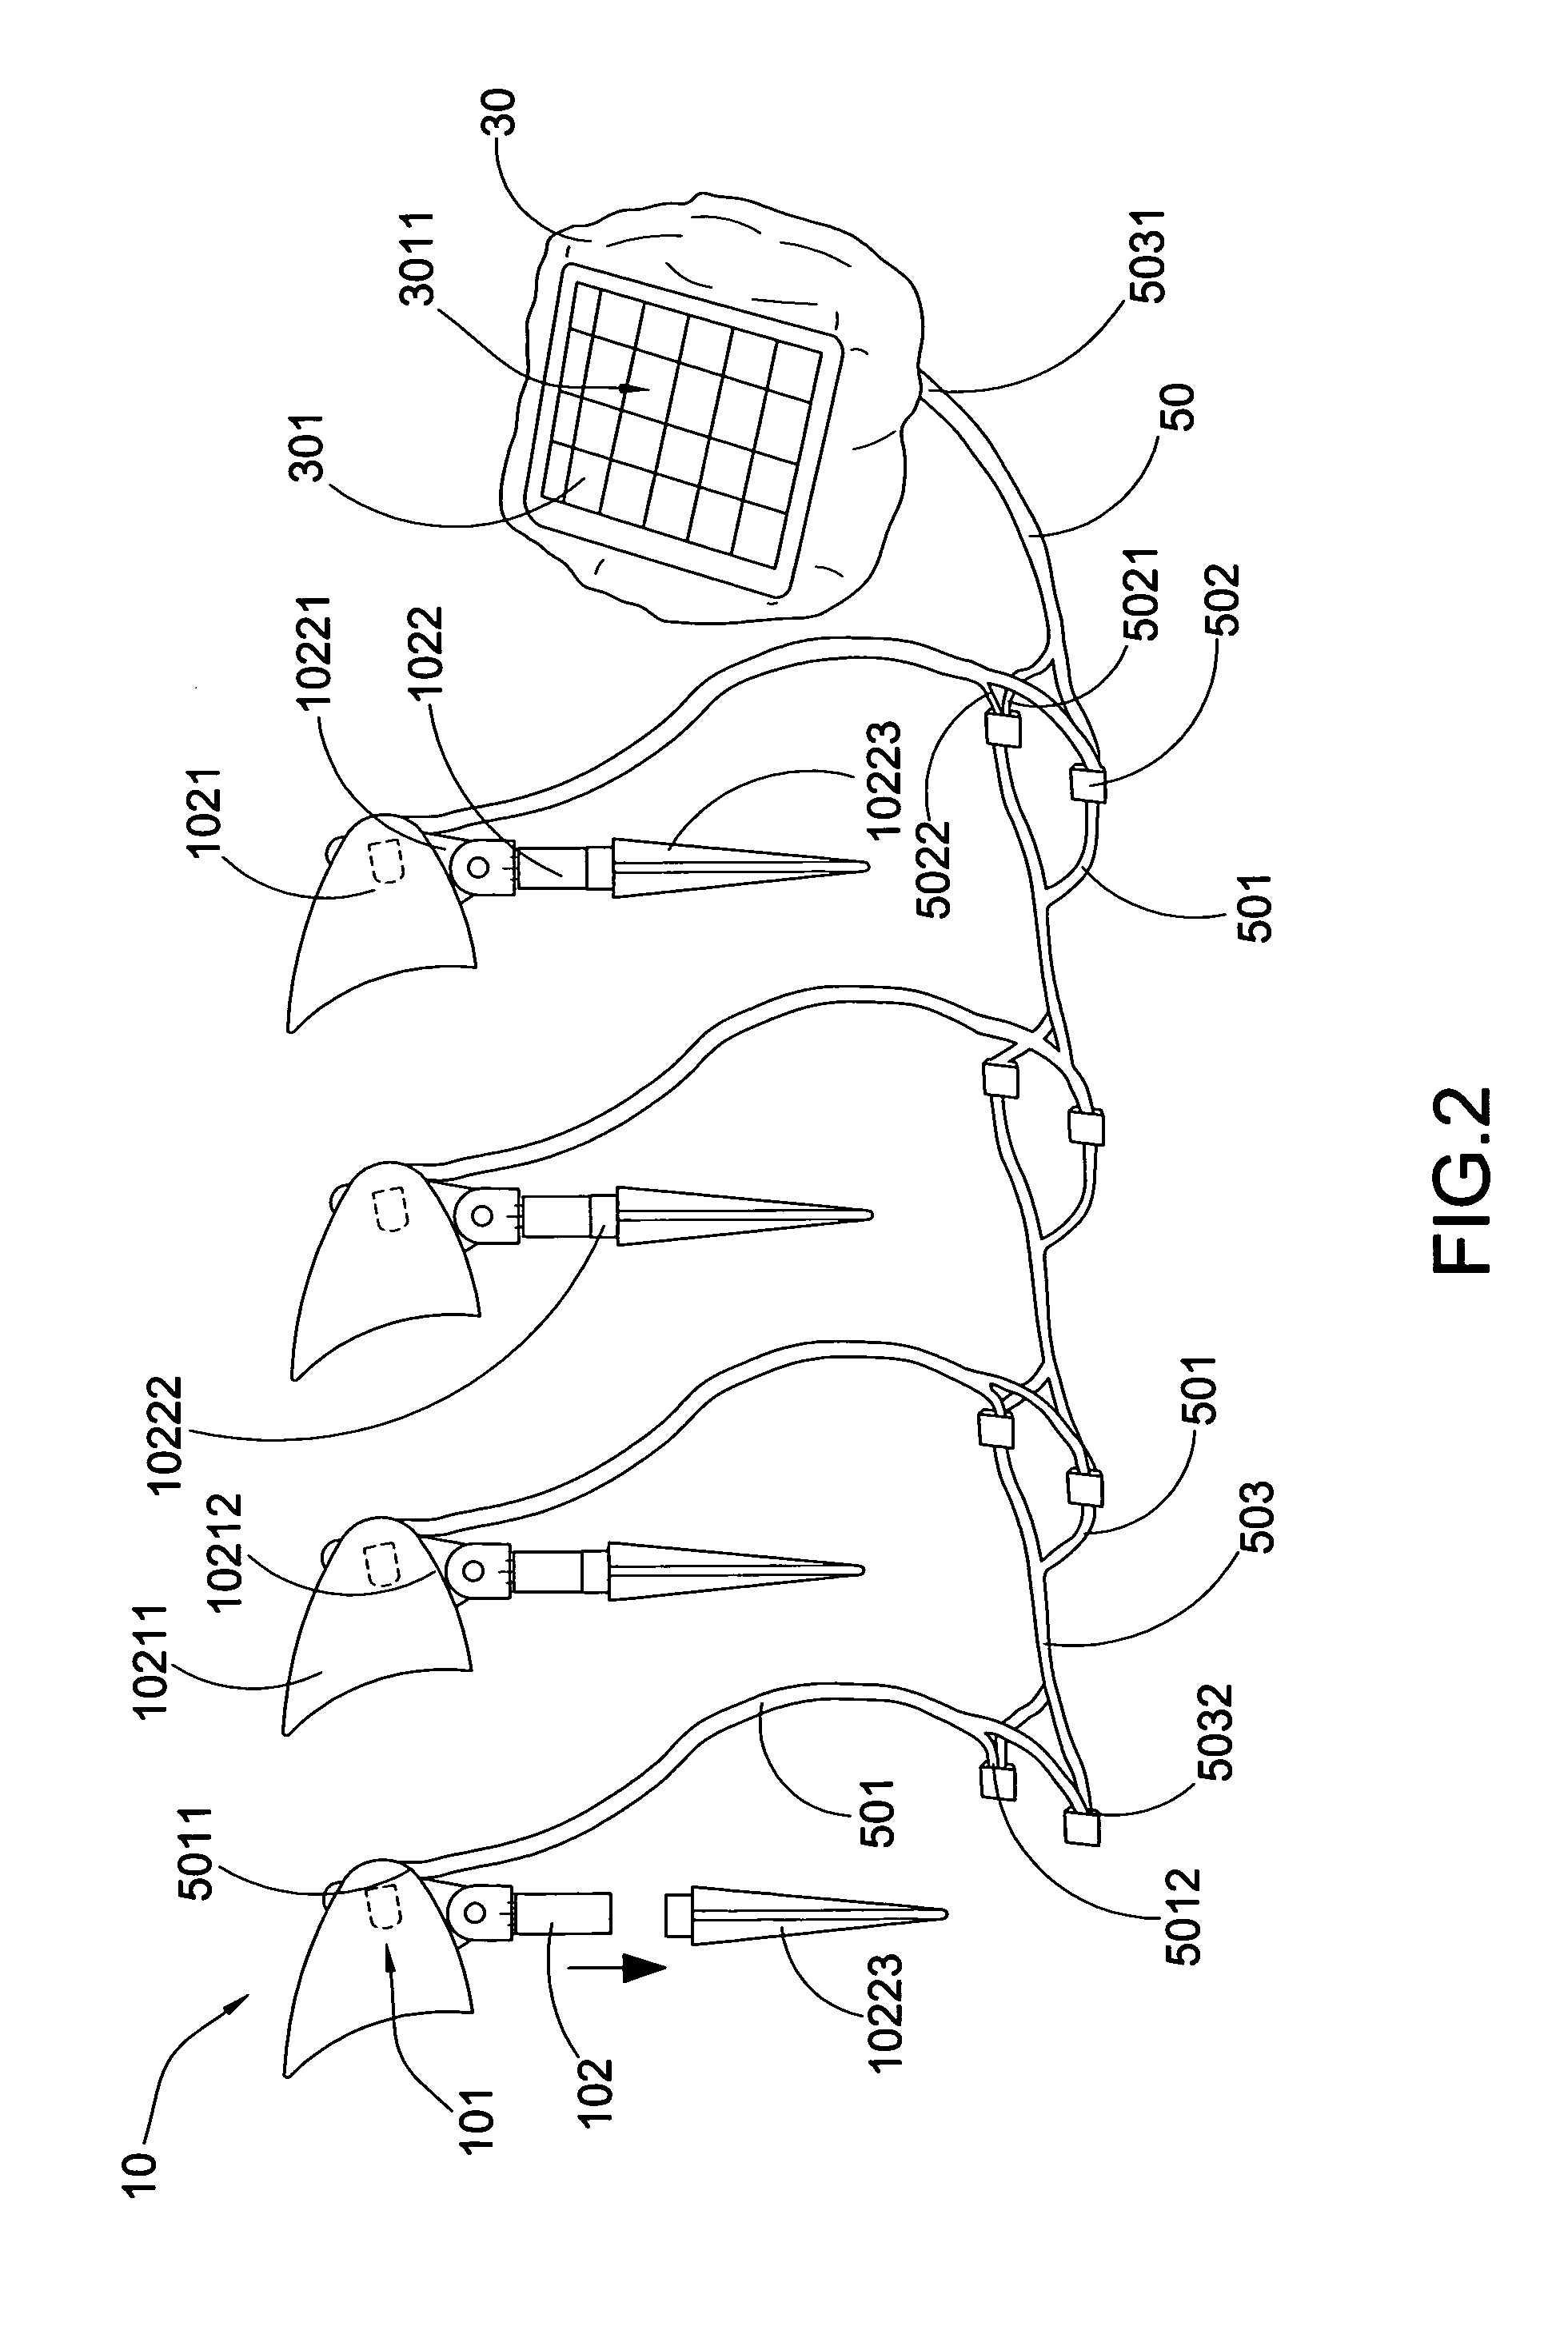 Solar lighting apparatus and system thereof